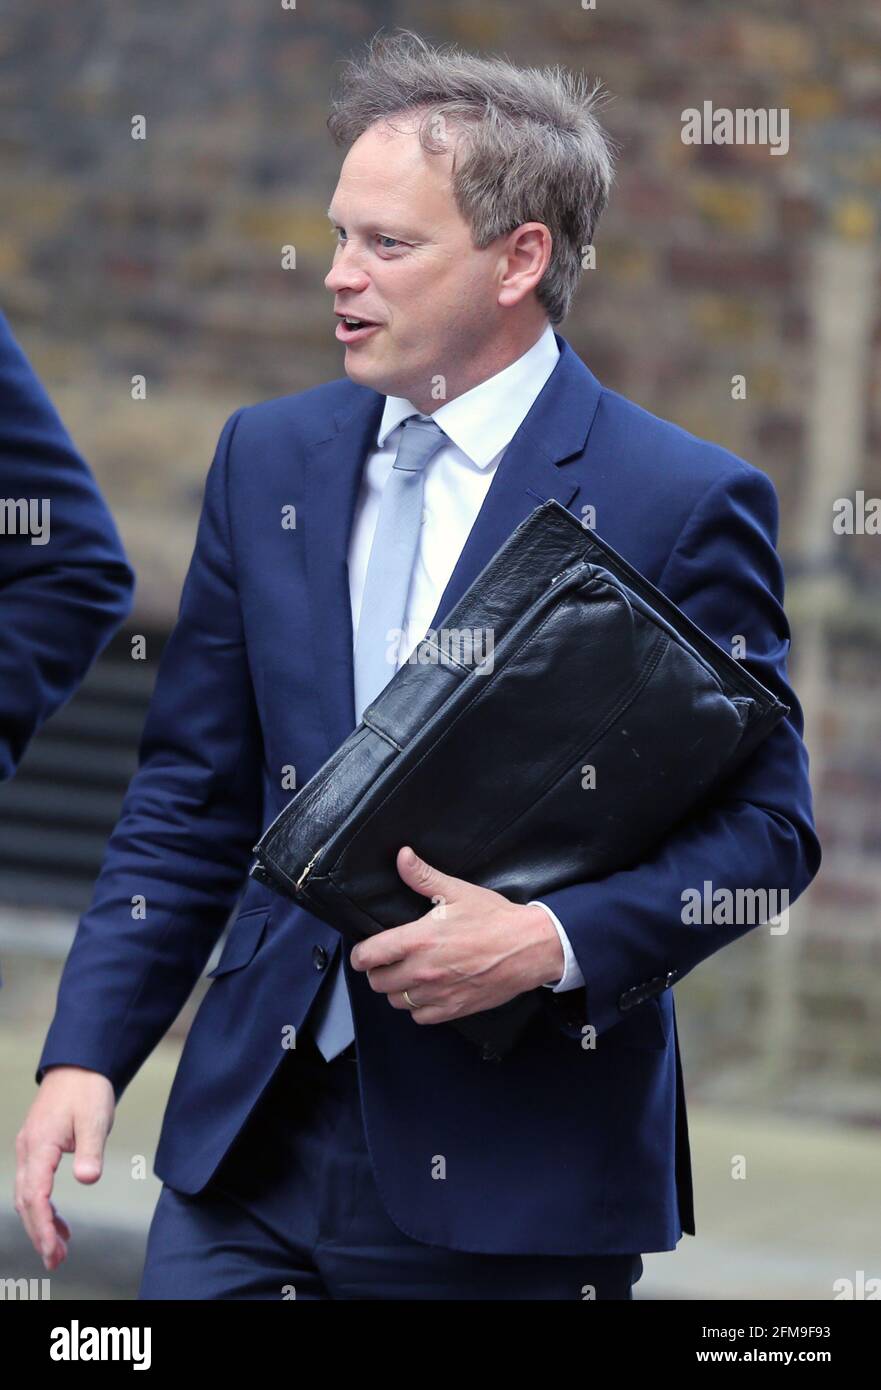 London, England, UK. 7th May, 2021. UK Secretary of State for Transport GRANT SHAPPS arrives in Downing Street ahead of the press conference he is expected to announce traffic light system covid-19 risk categorisation of countries. The UK prepares to lift the ban o foreign travel on 17th May but some popular holiday destinations are expected to be in amber and red list in the new system, so people travelling there will heave to go into quarantine for 5 to 10 days. Credit: Tayfun Salci/ZUMA Wire/Alamy Live News Stock Photo